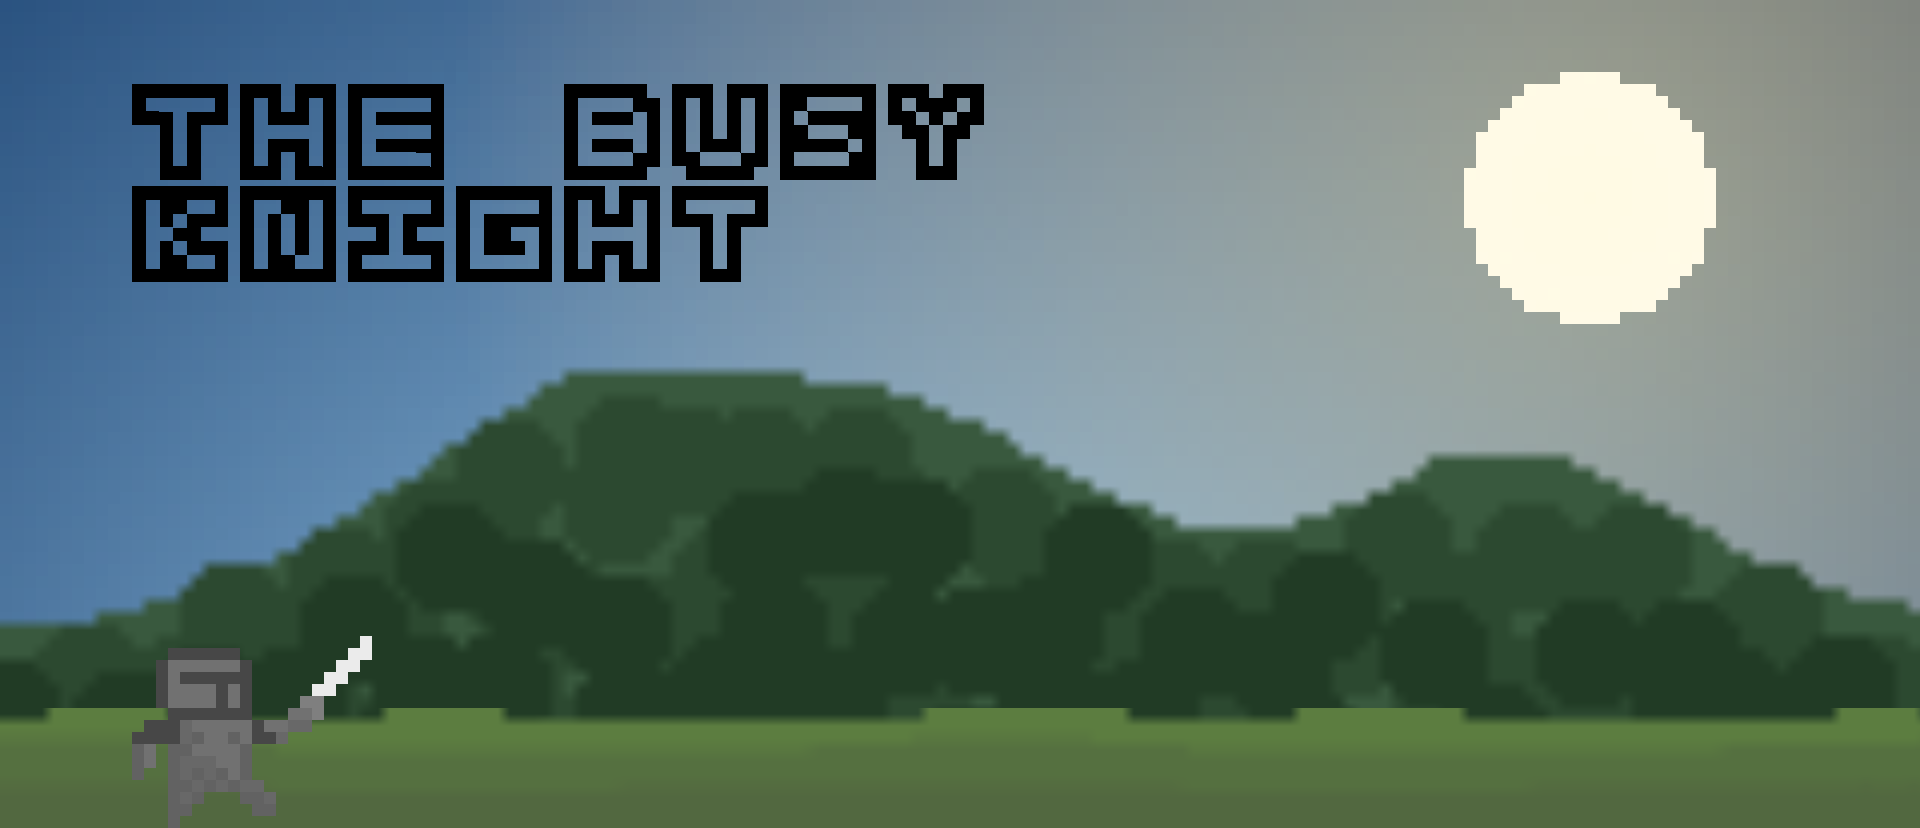 The Busy Knight